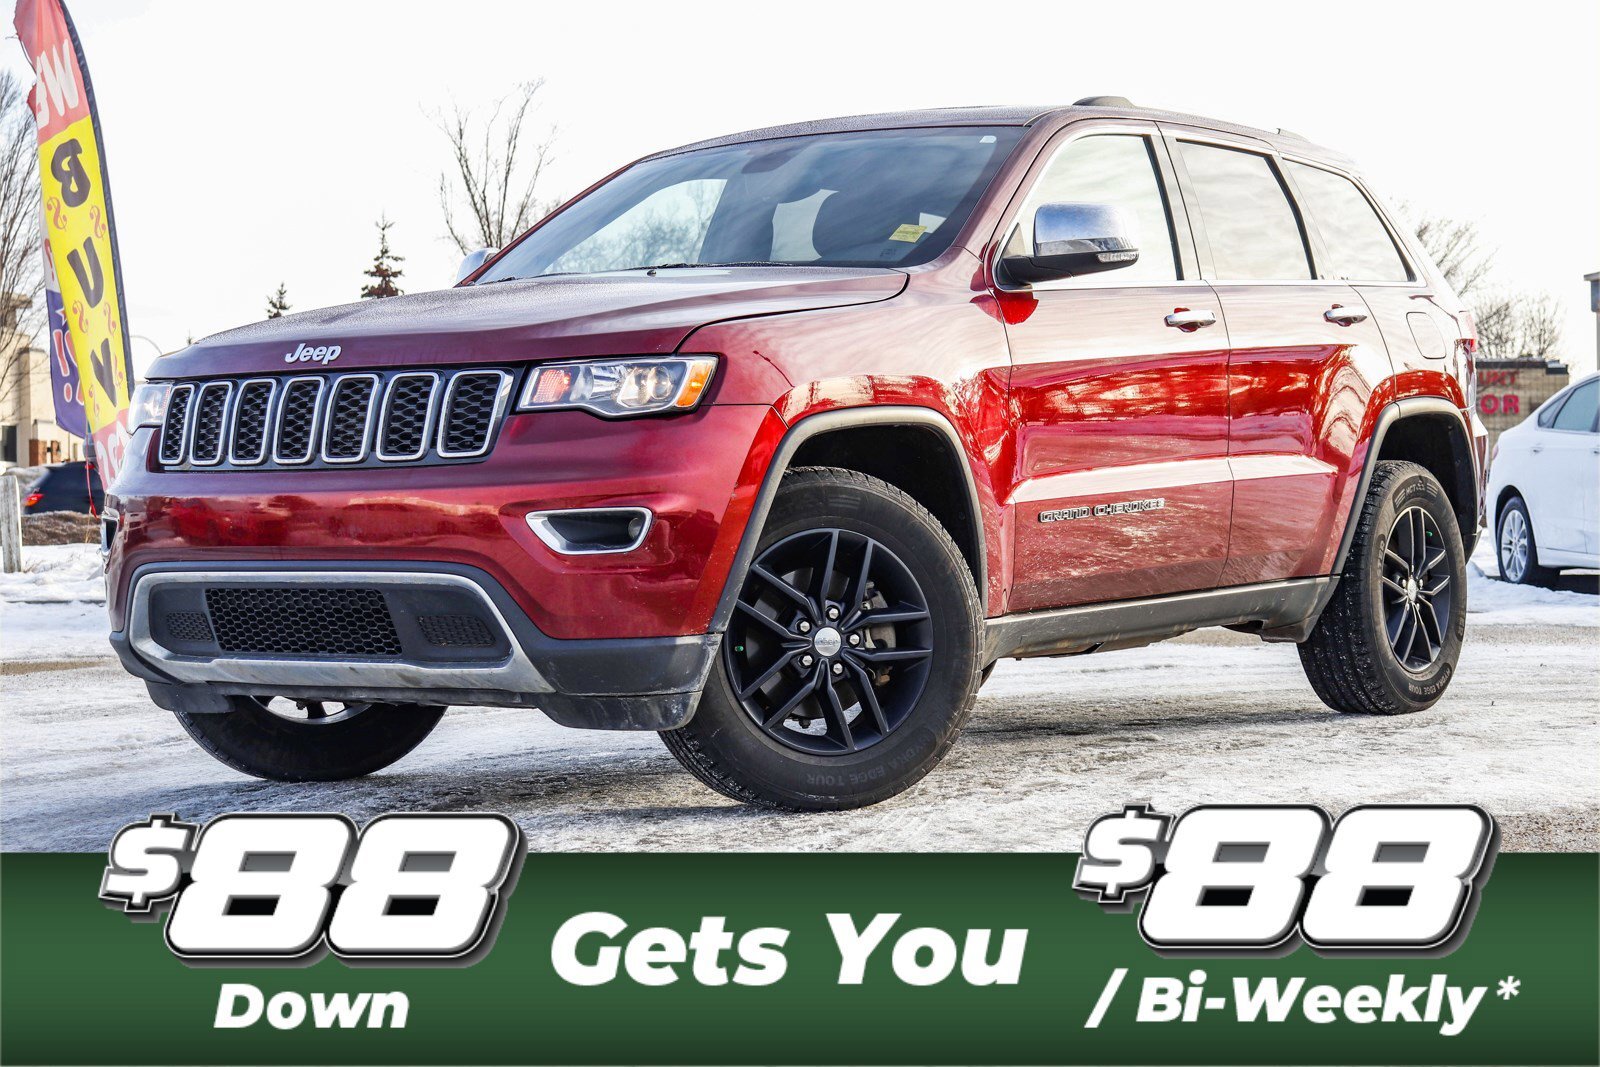 2017 Jeep Grand Cherokee 4WD Limited